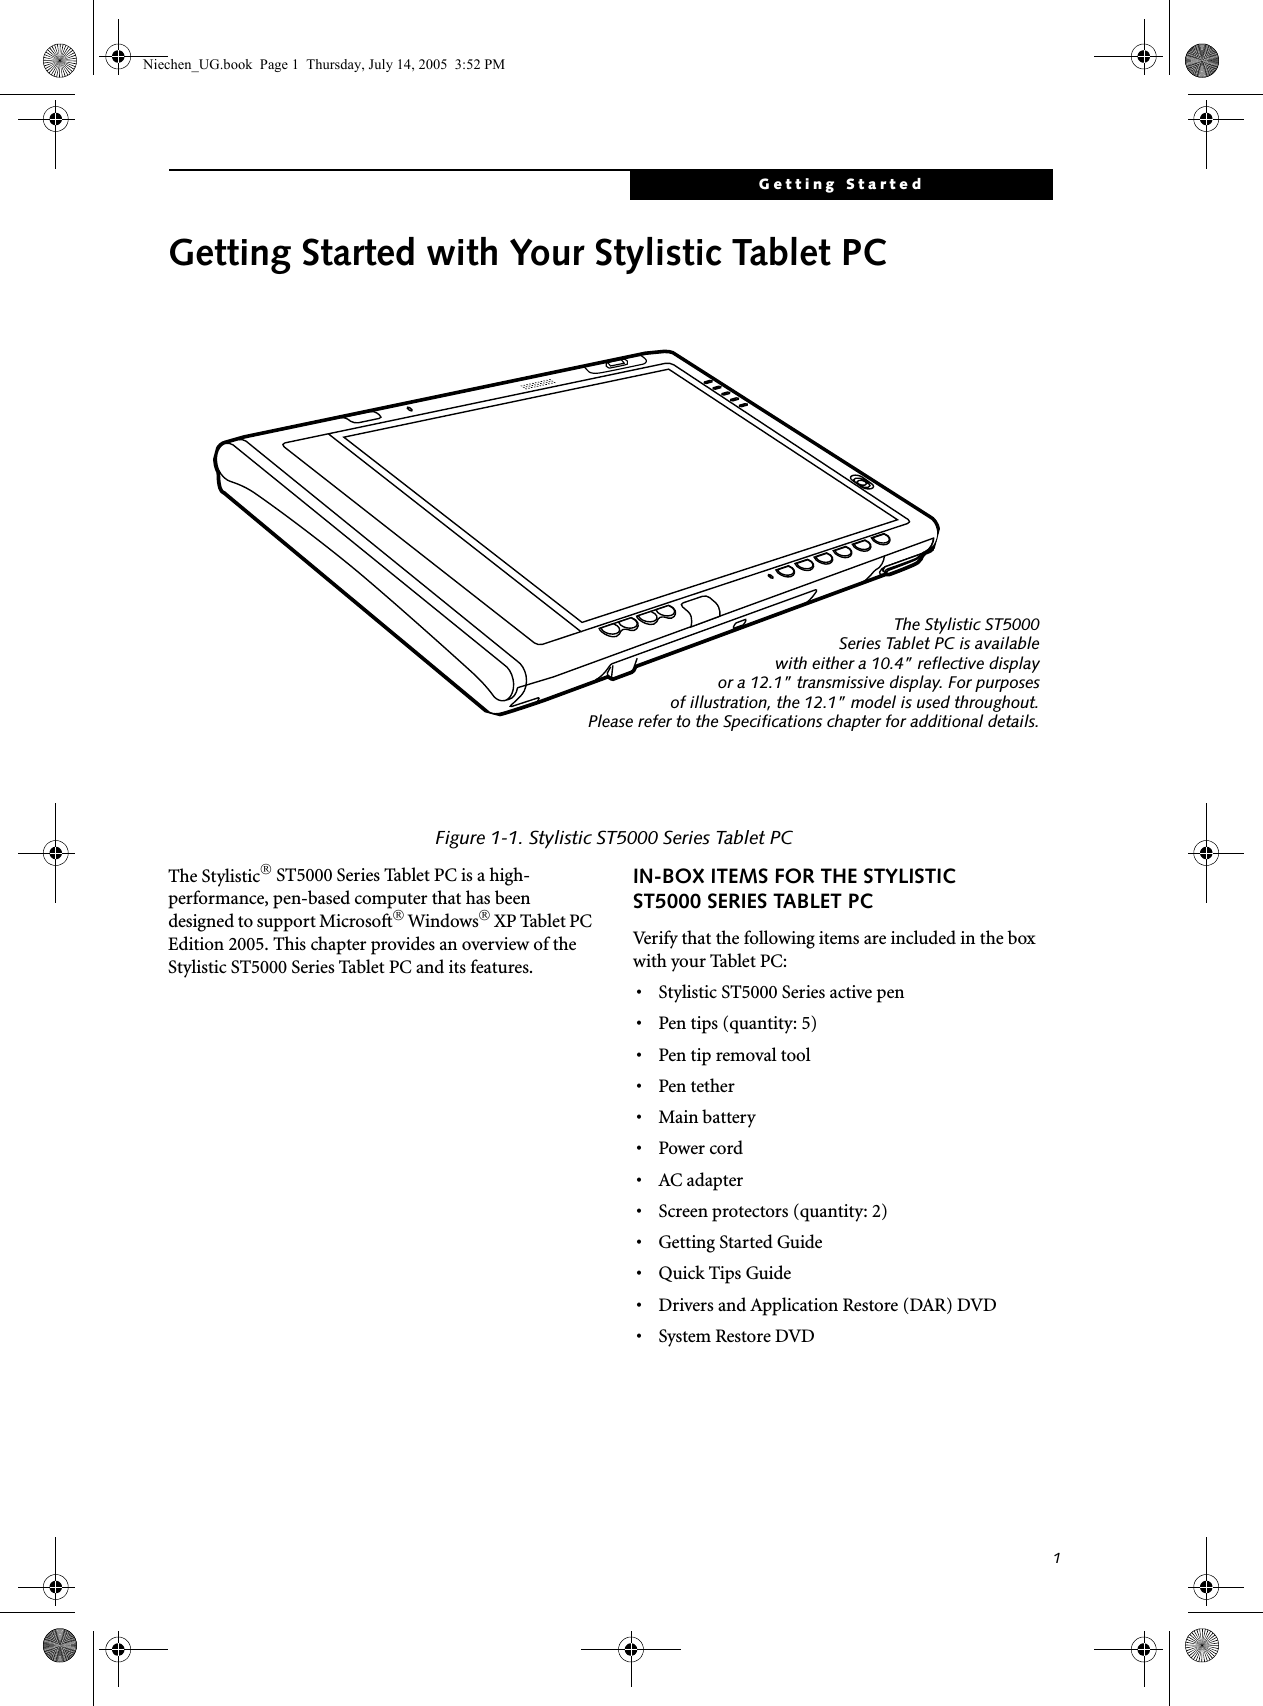 1Getting StartedGetting Started with Your Stylistic Tablet PCFigure 1-1. Stylistic ST5000 Series Tablet PCThe Stylistic® ST5000 Series Tablet PC is a high-performance, pen-based computer that has been designed to support Microsoft® Windows® XP Tablet PC Edition 2005. This chapter provides an overview of the Stylistic ST5000 Series Tablet PC and its features.IN-BOX ITEMS FOR THE STYLISTIC ST5000 SERIES TABLET PCVerify that the following items are included in the box with your Tablet PC: • Stylistic ST5000 Series active pen• Pen tips (quantity: 5)•Pen tip removal tool•Pen tether• Main battery •Power cord•AC adapter• Screen protectors (quantity: 2)• Getting Started Guide• Quick Tips Guide• Drivers and Application Restore (DAR) DVD• System Restore DVDThe Stylistic ST5000Series Tablet PC is availablewith either a 10.4” reflective displayor a 12.1” transmissive display. For purposesof illustration, the 12.1” model is used throughout.Please refer to the Specifications chapter for additional details.Niechen_UG.book  Page 1  Thursday, July 14, 2005  3:52 PM